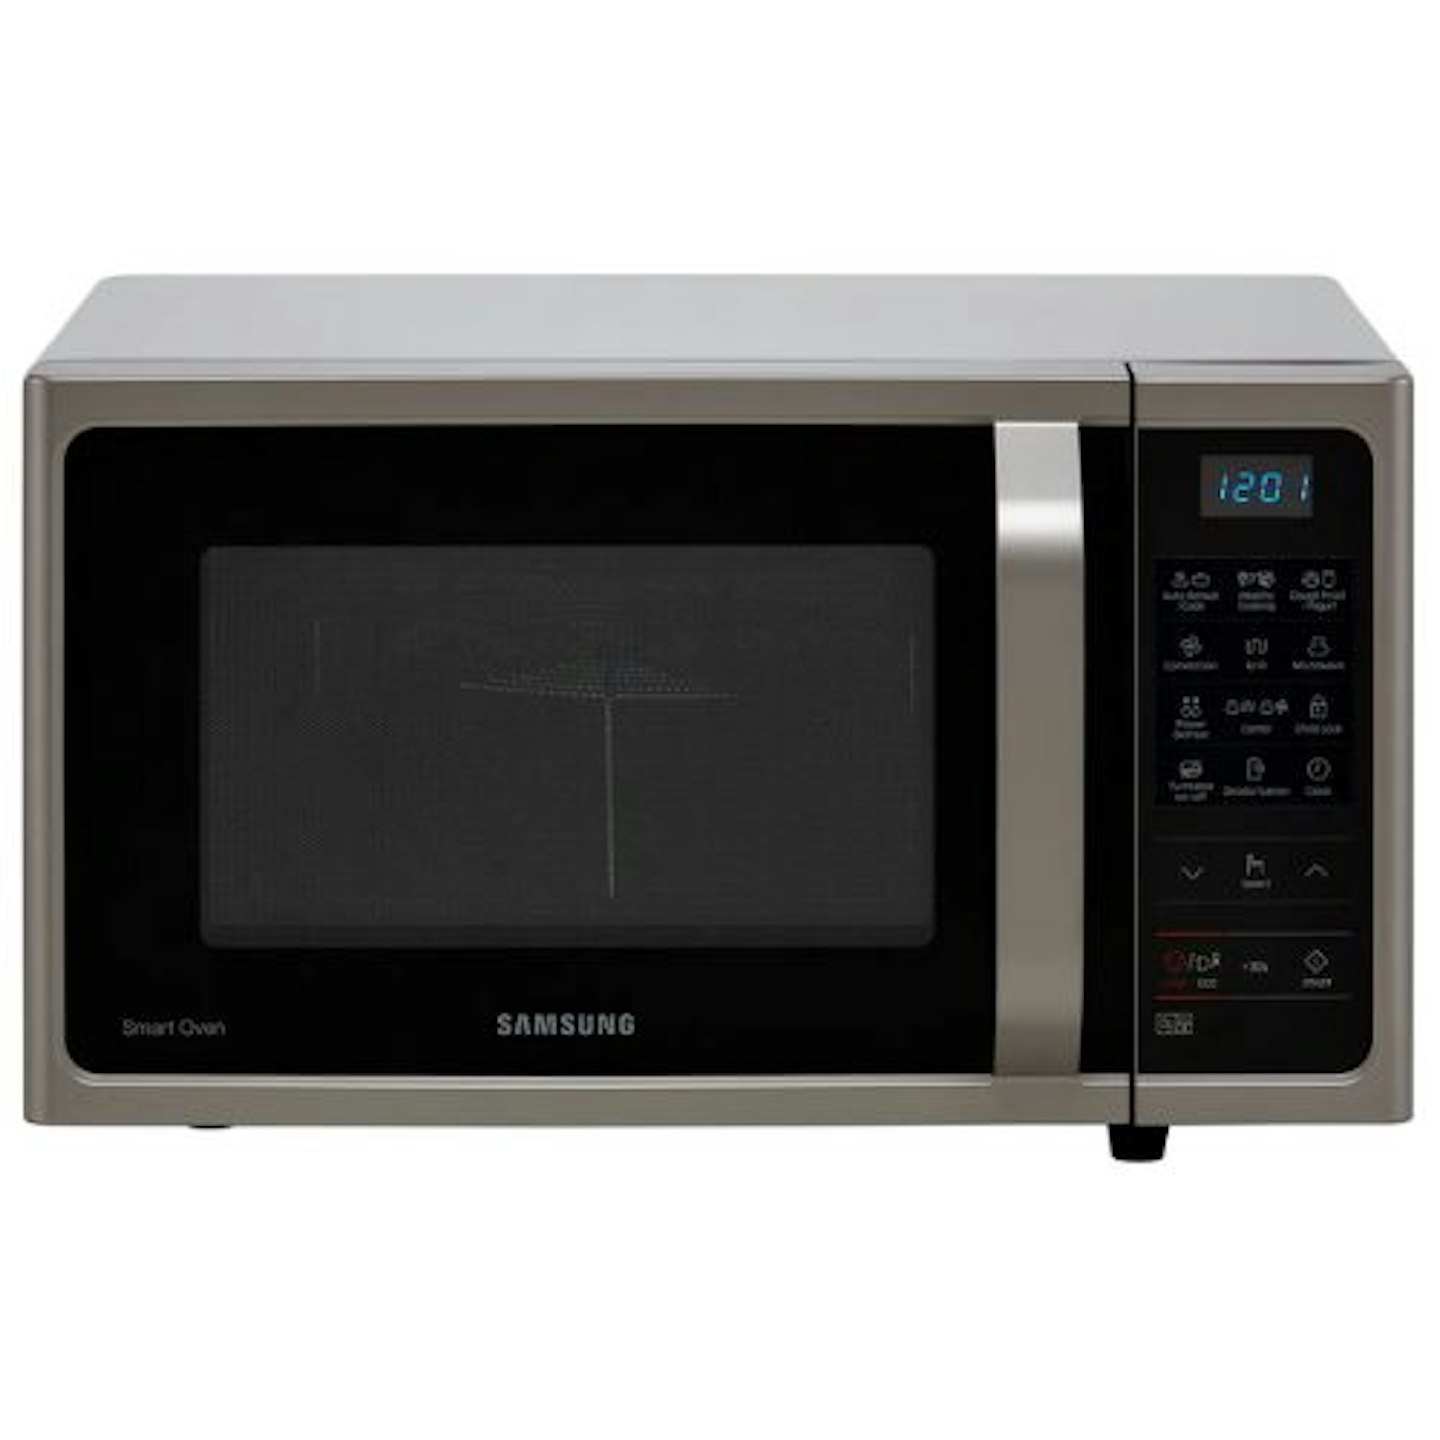  Samsung MW5000H MC28H5013AS 28 Litre Combination Microwave Oven